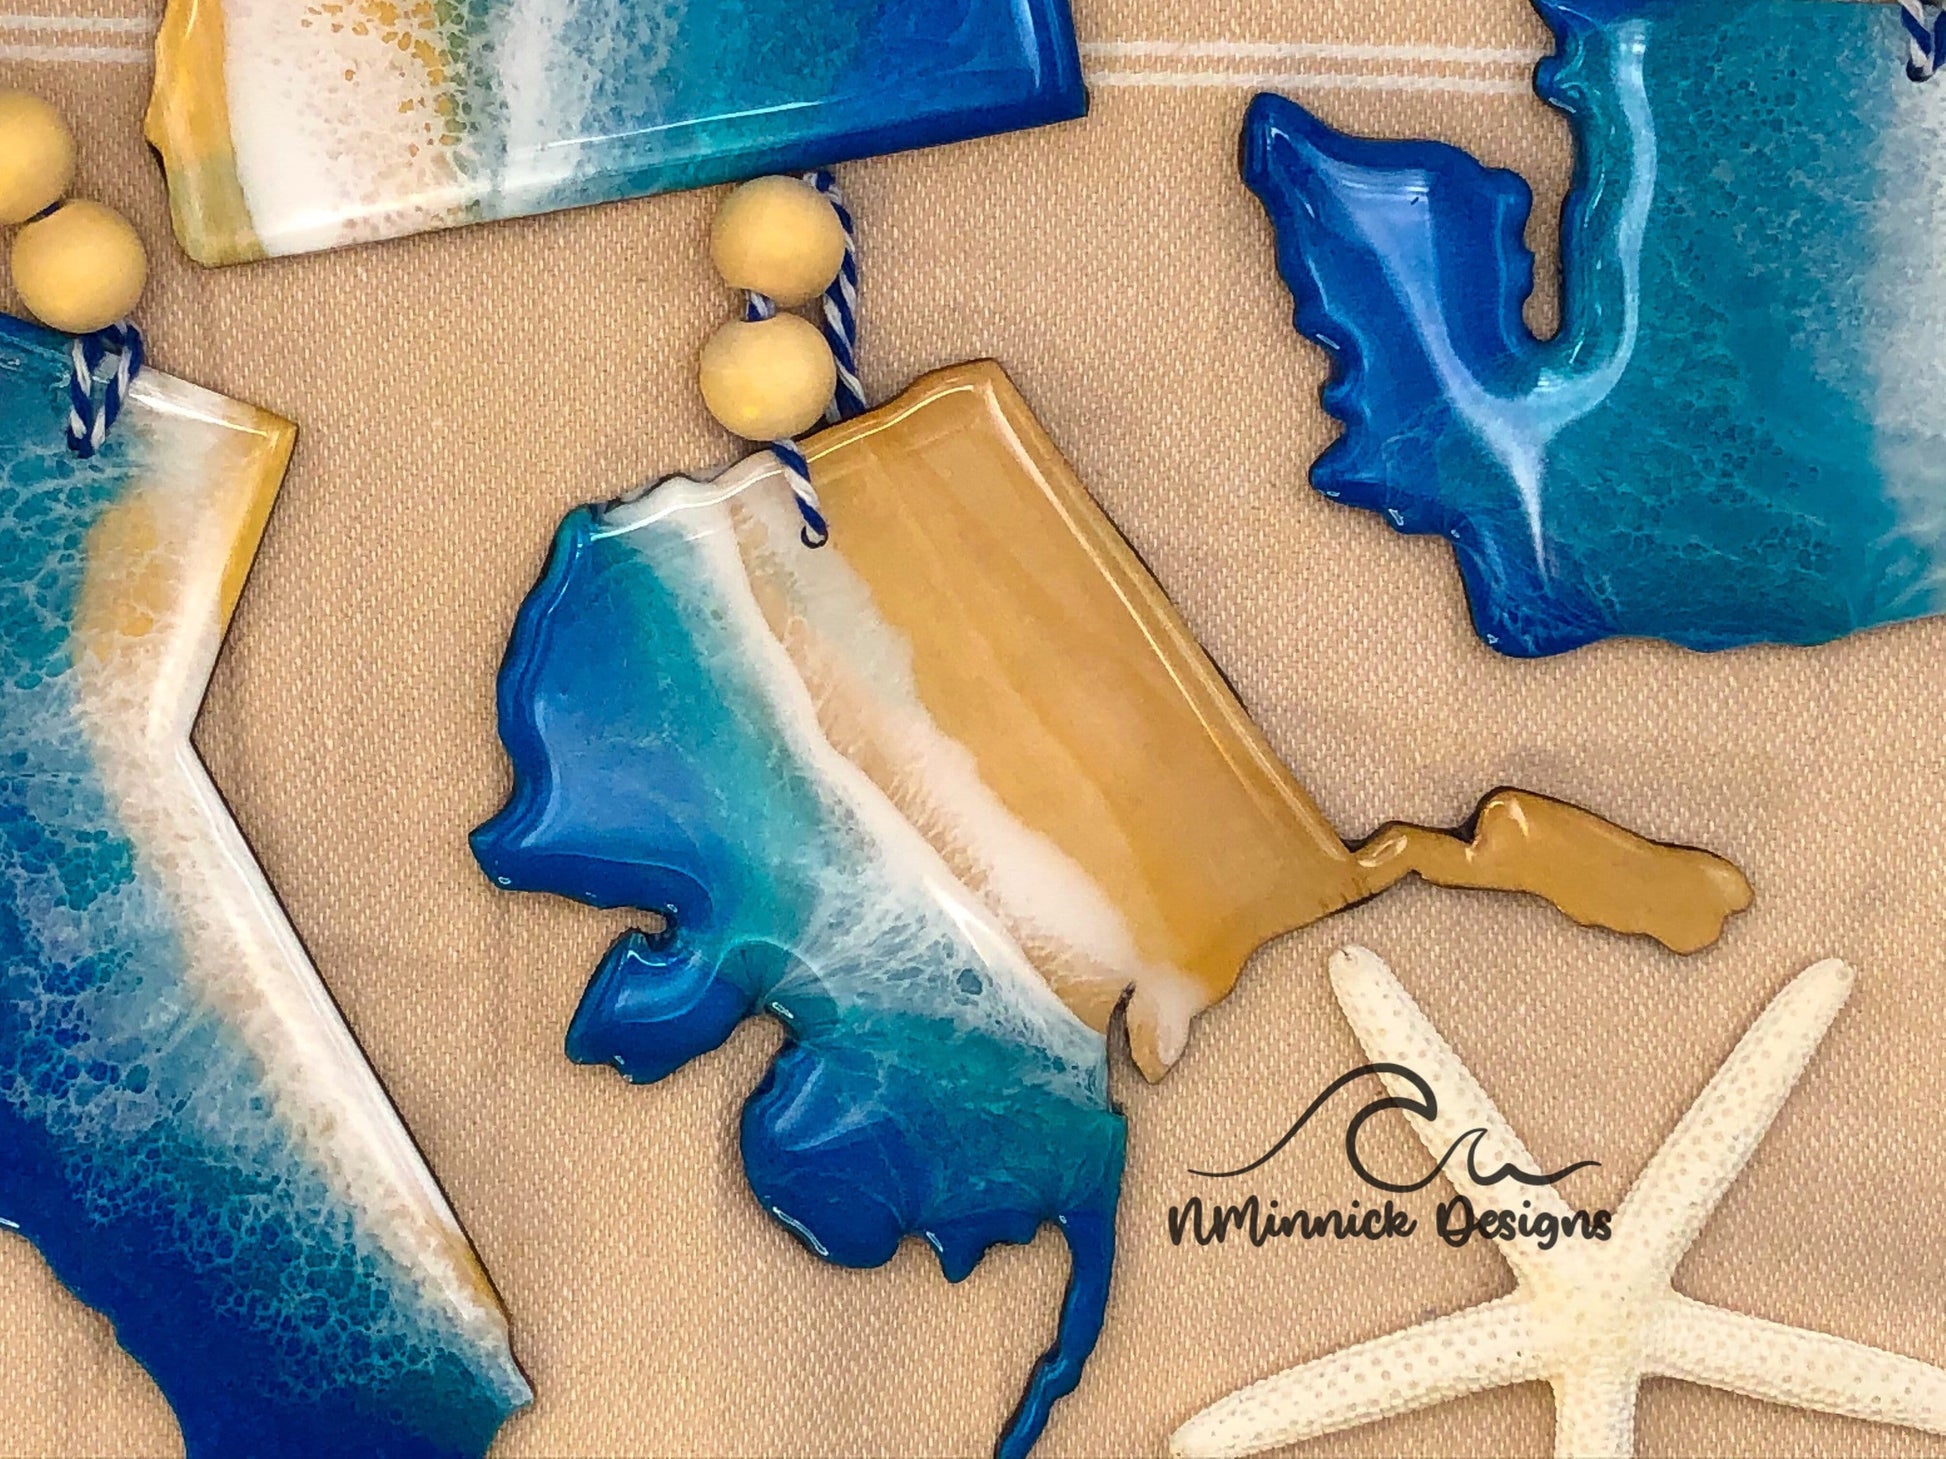 Alaska ocean resin ornament. 4 to 4.5 inch laser cut wood ornament with multiple layers of epoxy resin to create a one of a kind ocean scene. Colors are dark blue, okinawa blue and white. 1/8 inch thick.